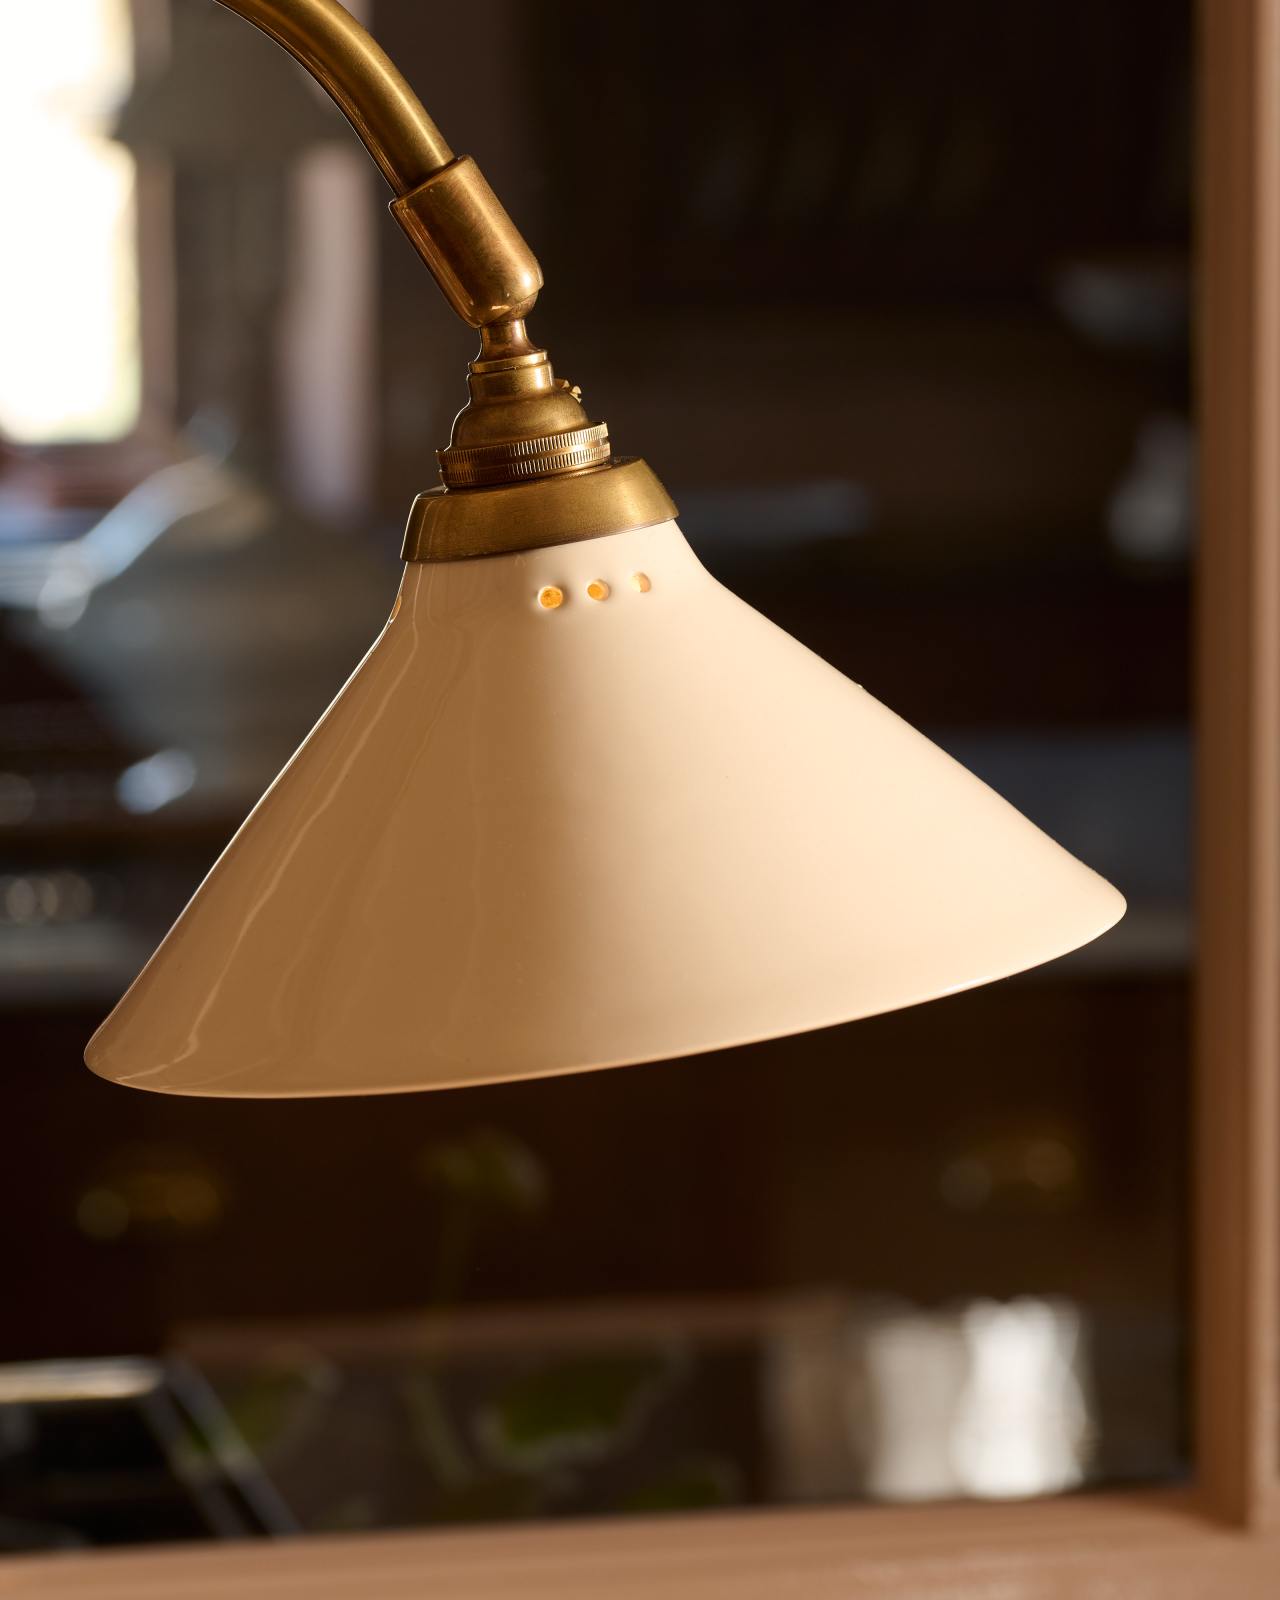 The Grand Tour Library Lamp